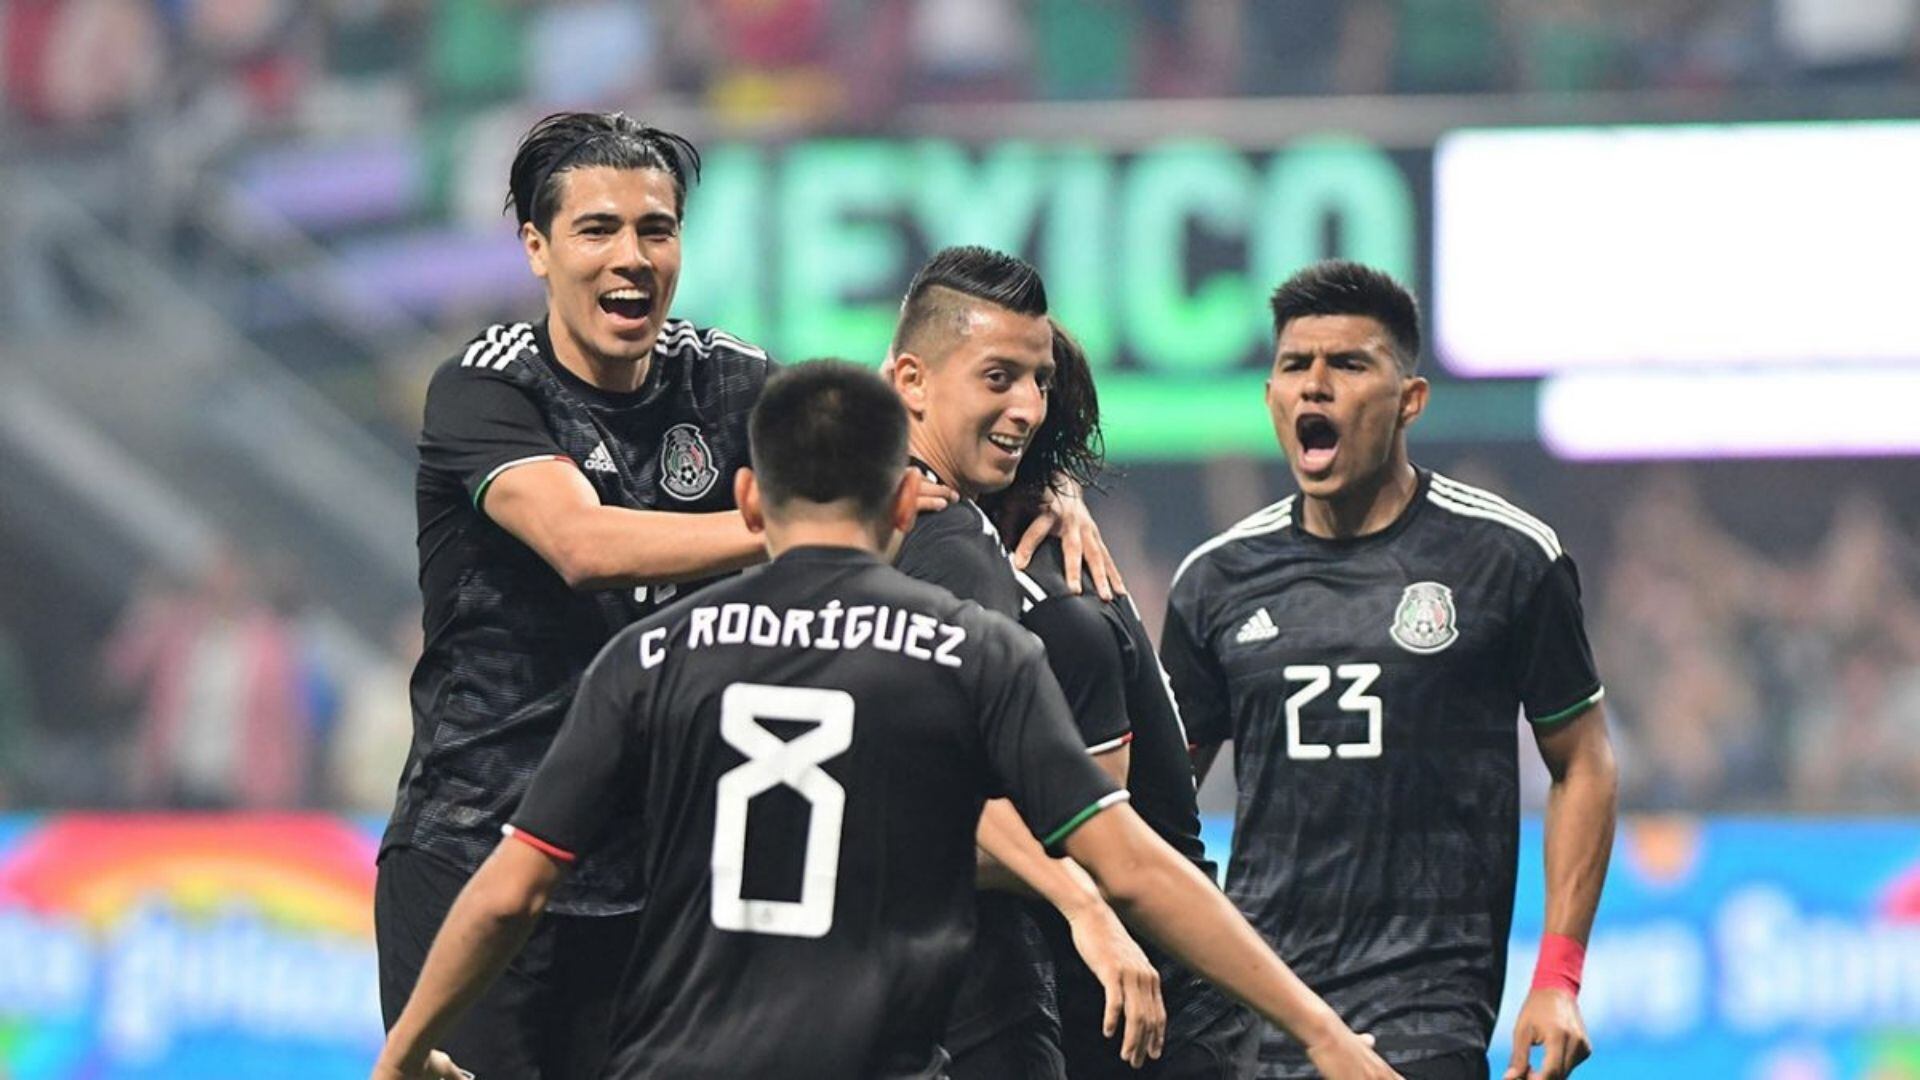 Bayern Munich is after a Mexican striker that could be what Mexico National Team needs